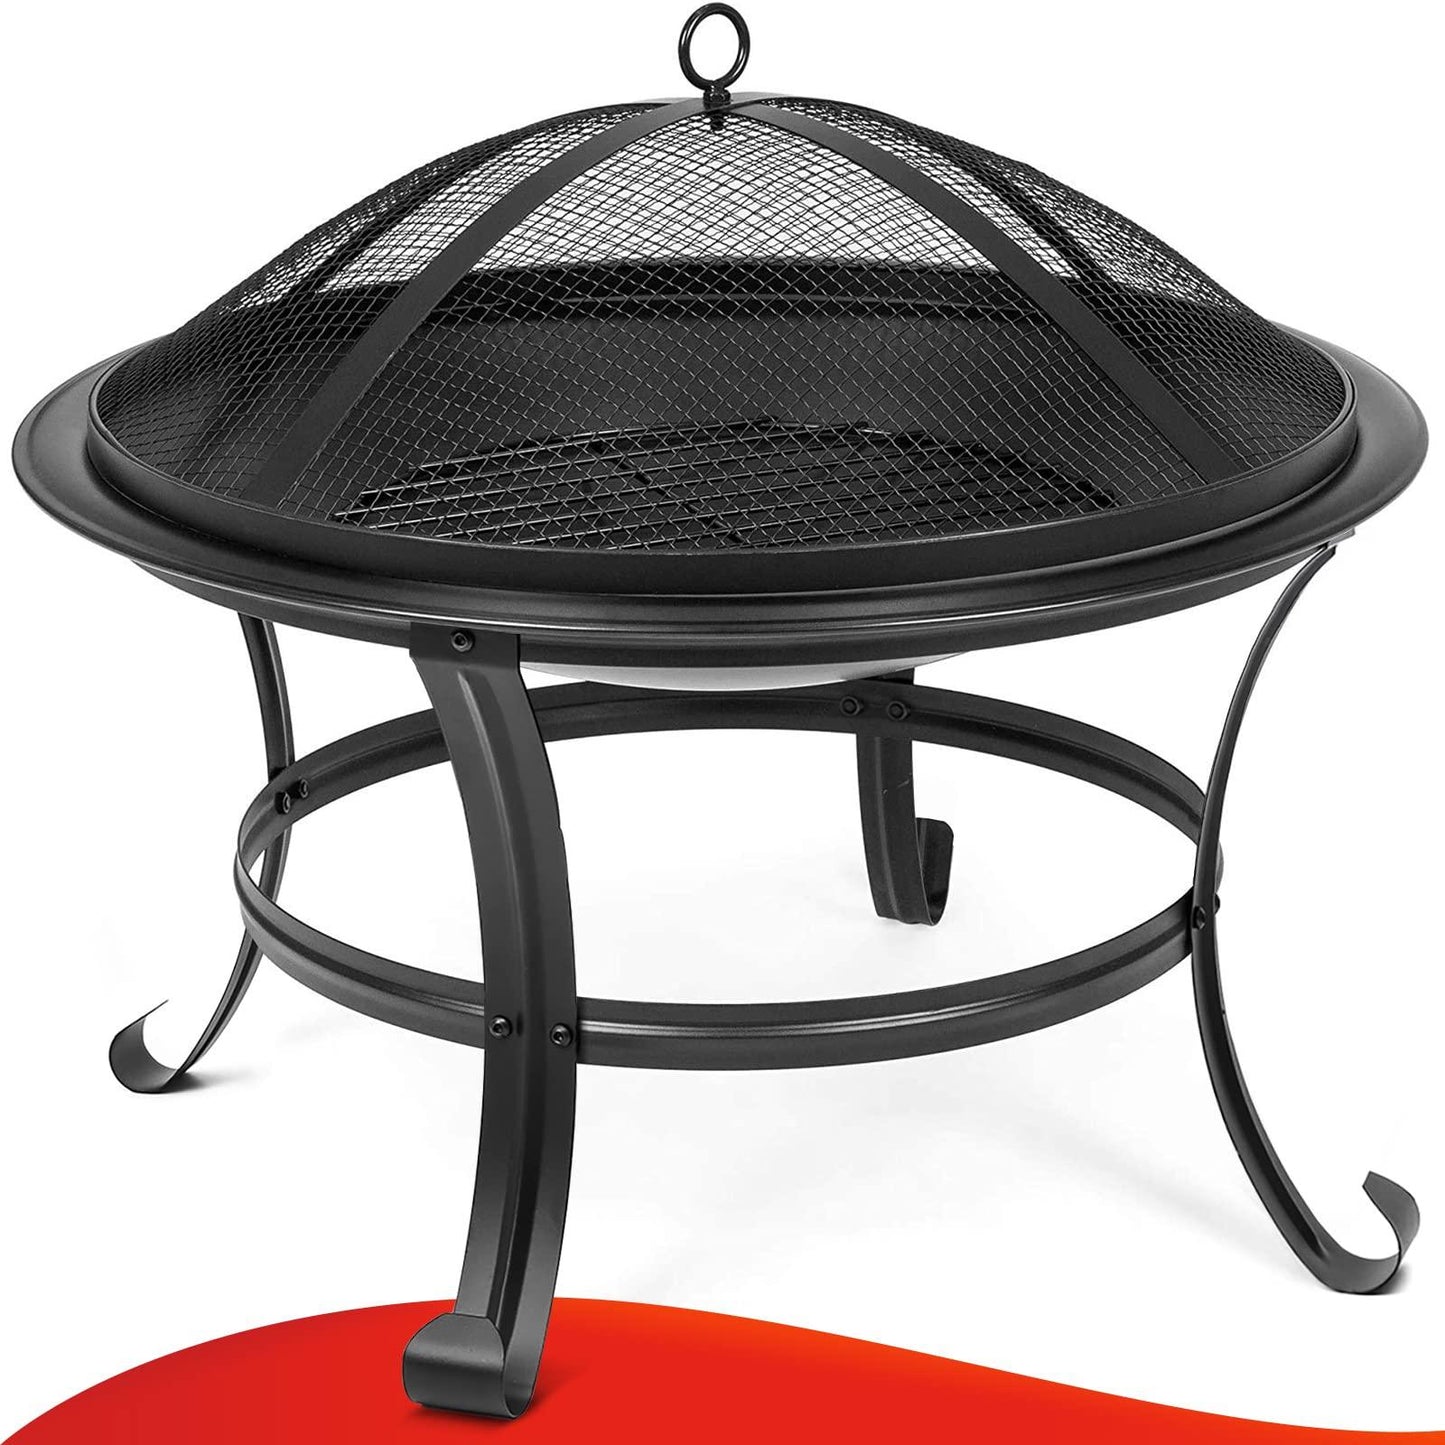 SINGLYFIRE 22 inch Fire Pit for Outside Outdoor Wood Burning Small Bonfire Pit Steel Firepit Bowl for Patio Camping Backyard Deck Picnic Porch,with Spark Screen,Log Grate,Poker - CookCave